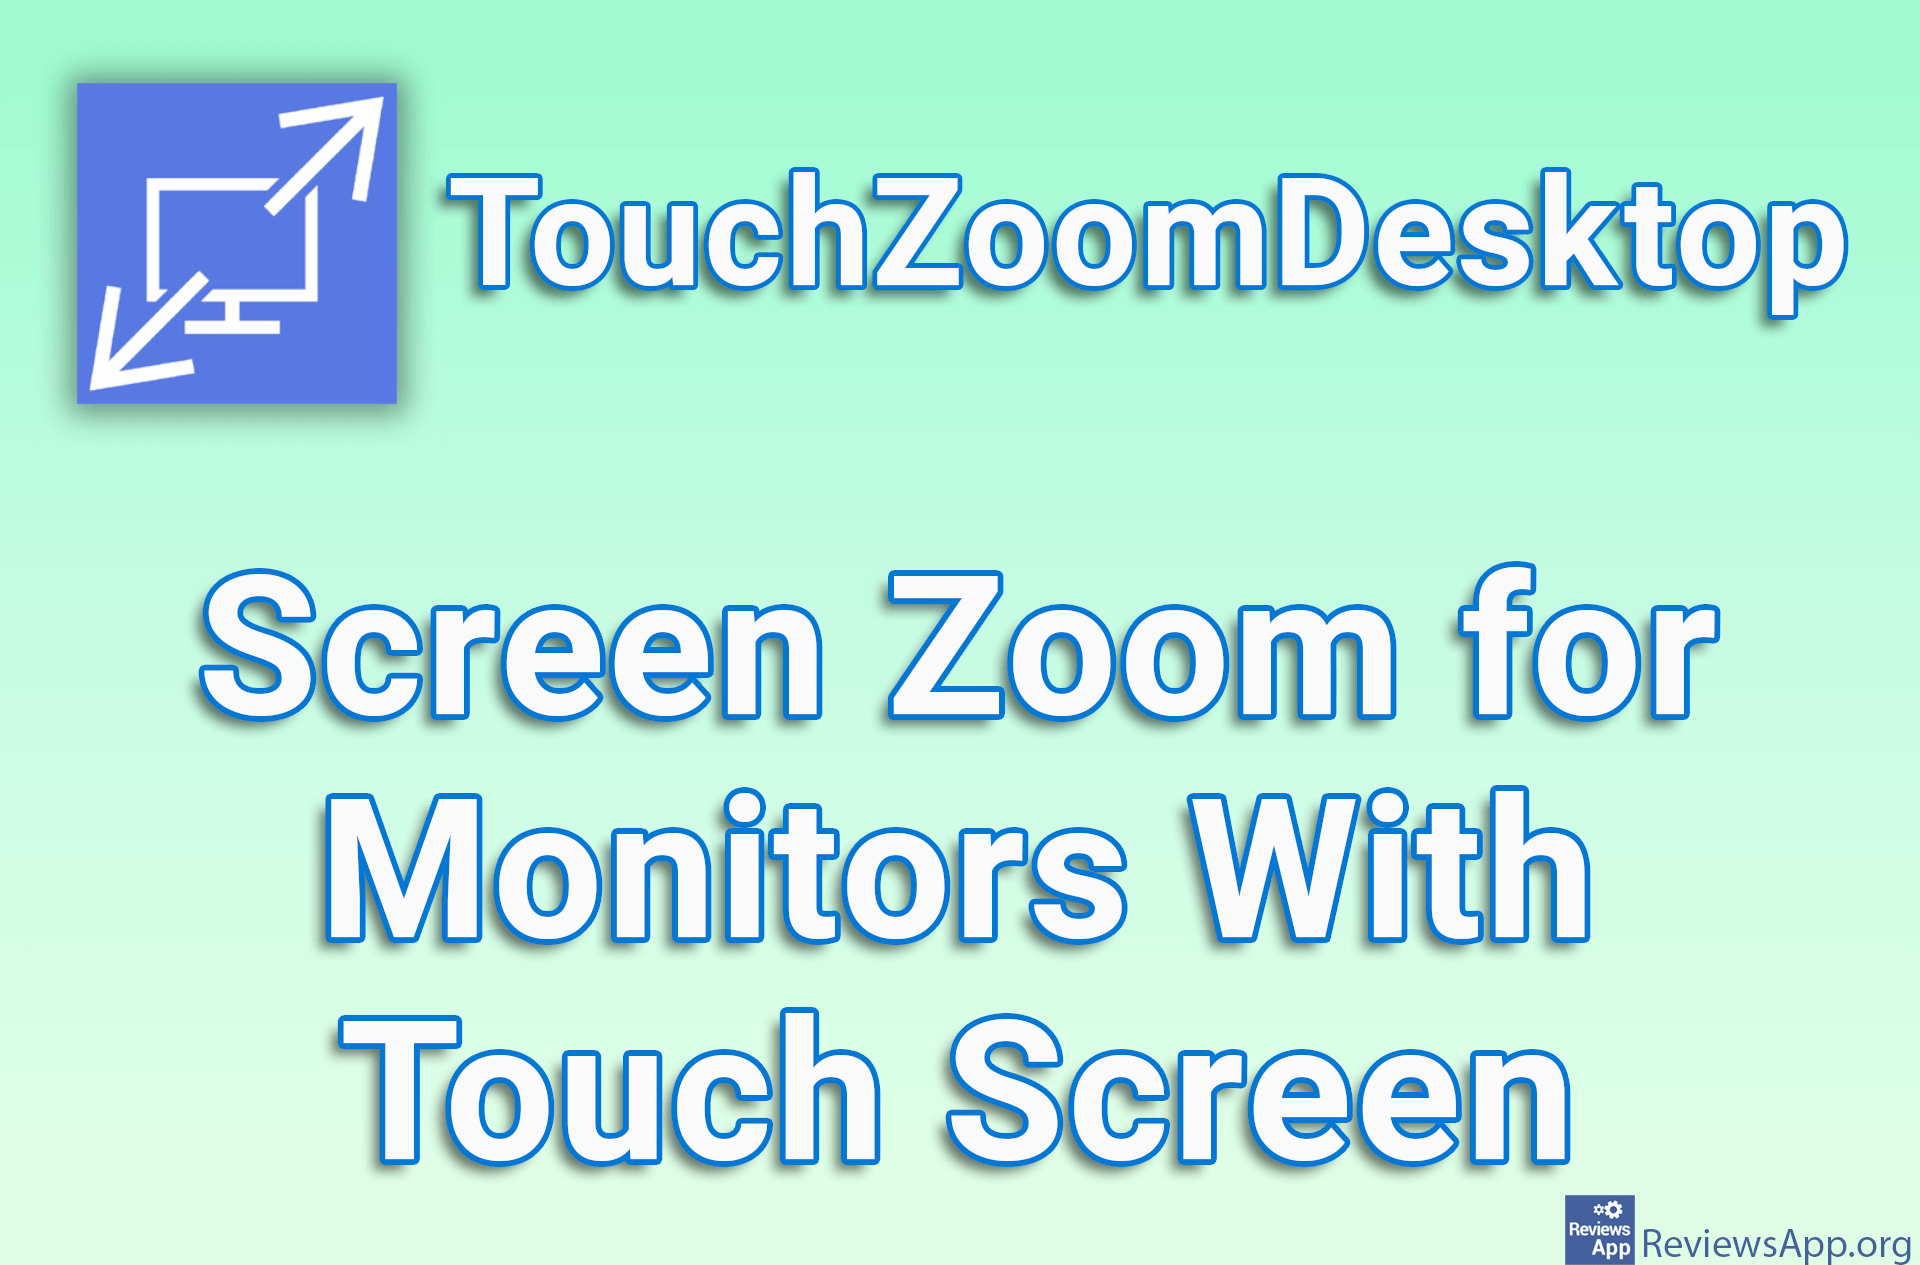 TouchZoomDesktop – Screen Zoom for Monitors With Touch Screen